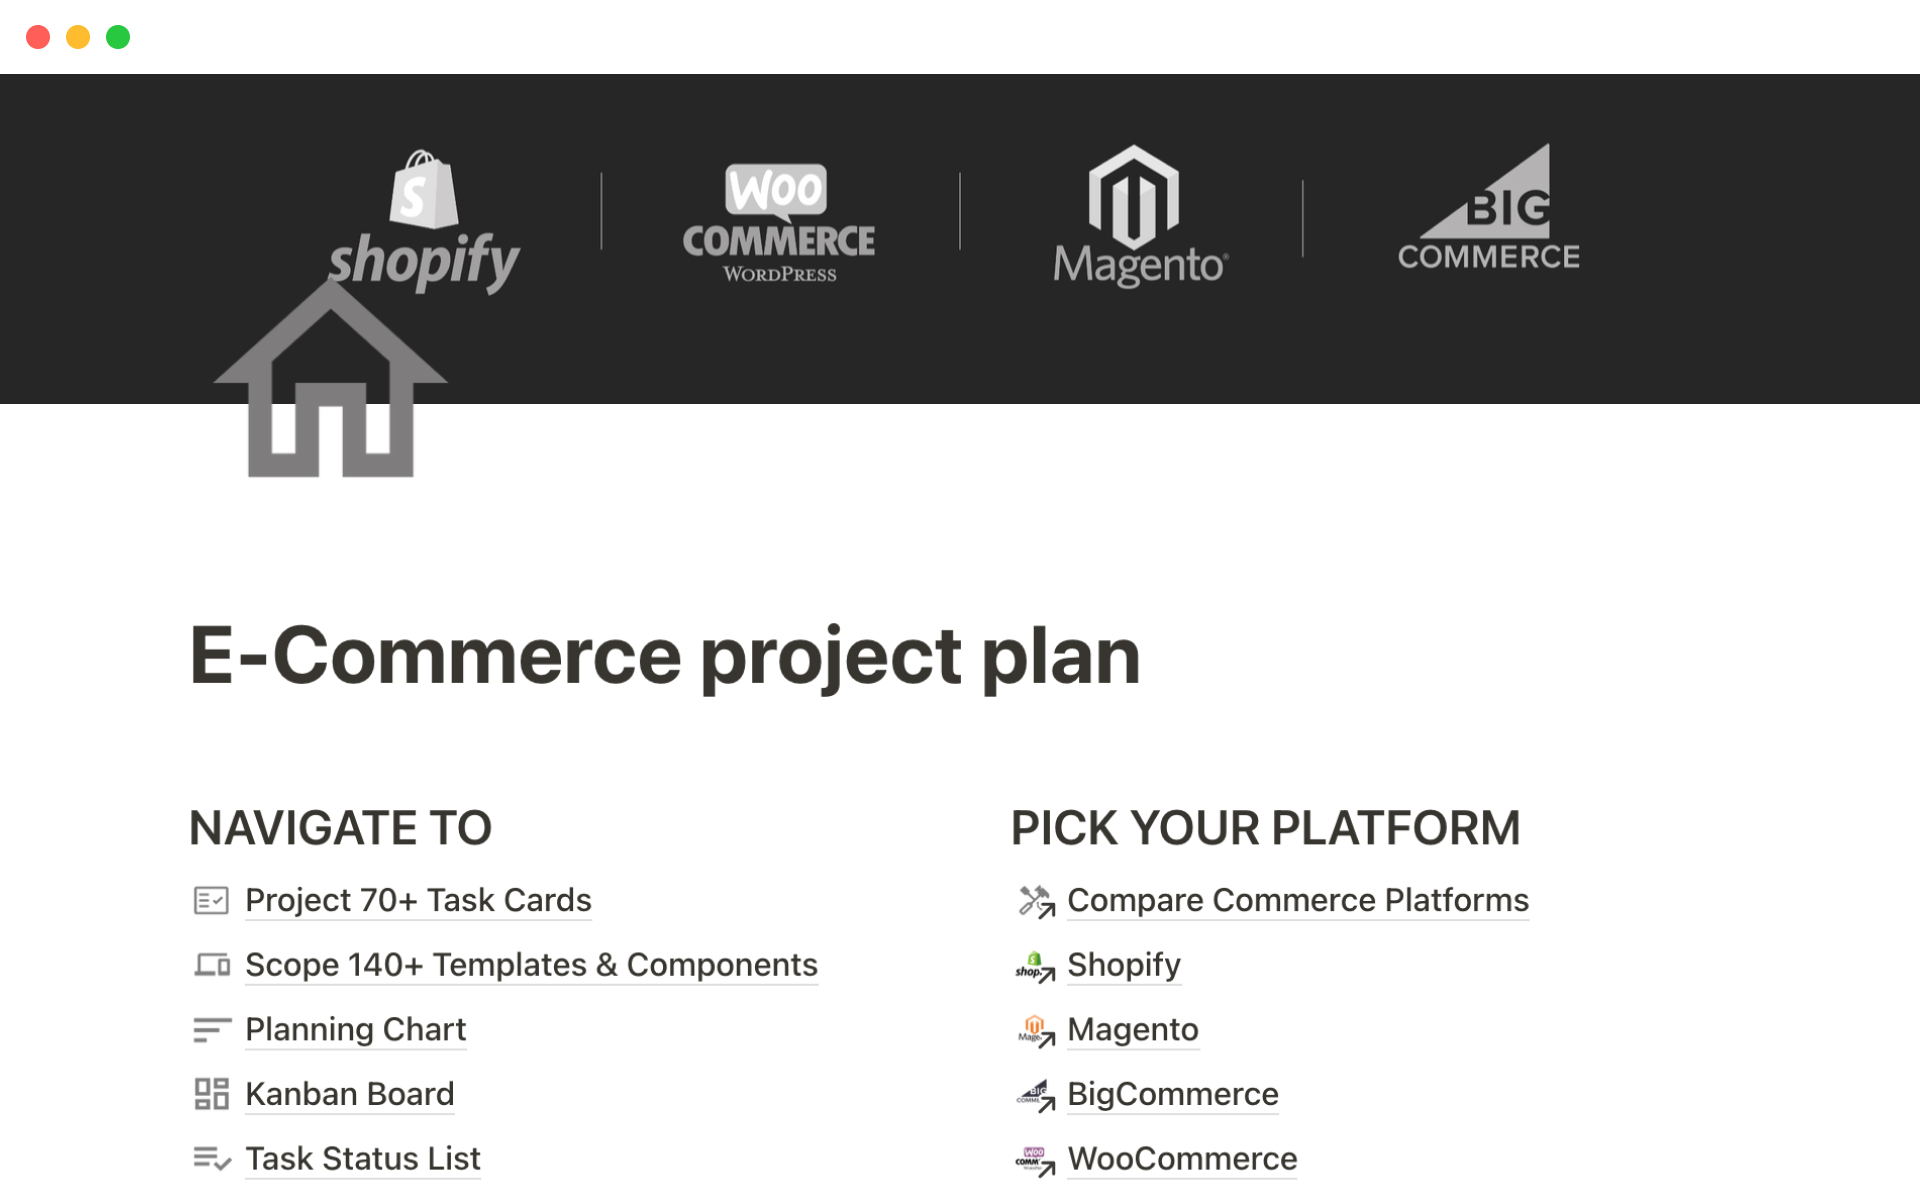 All tasks to build web shops on WooCommerce, WordPress, Shopify, Magento, or Big Commerce.